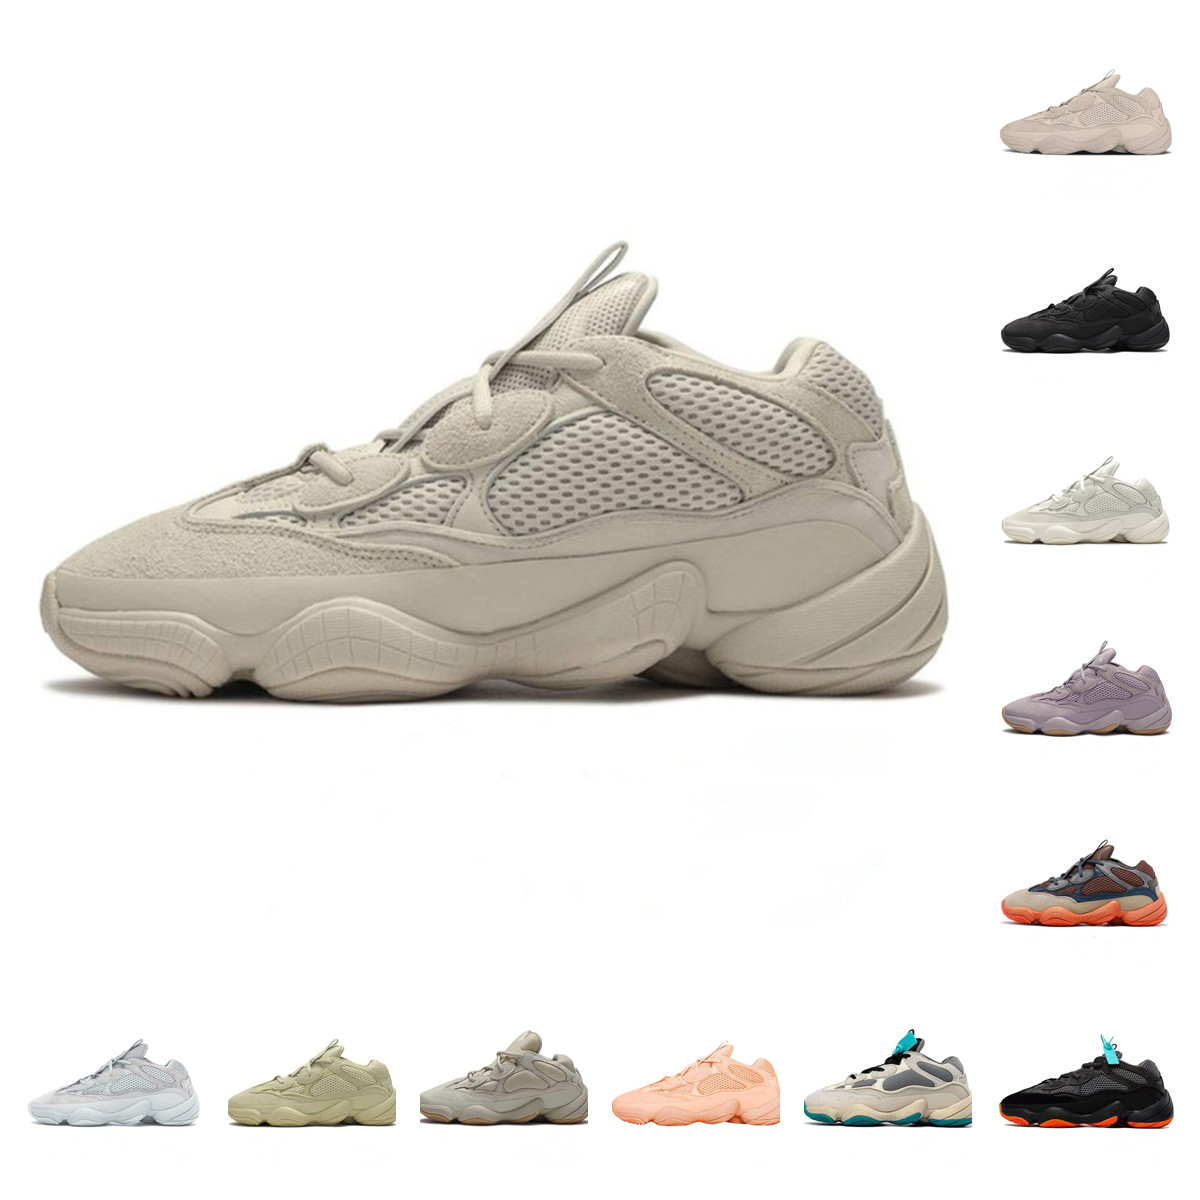 

Latest Kanye 500 Mens Running Shoes 2021 Enflame 500s Taupe Light Reflective Bone White Utility Black Super Moon Yellow Blush Women Trainers Sneakers, Not sold separately